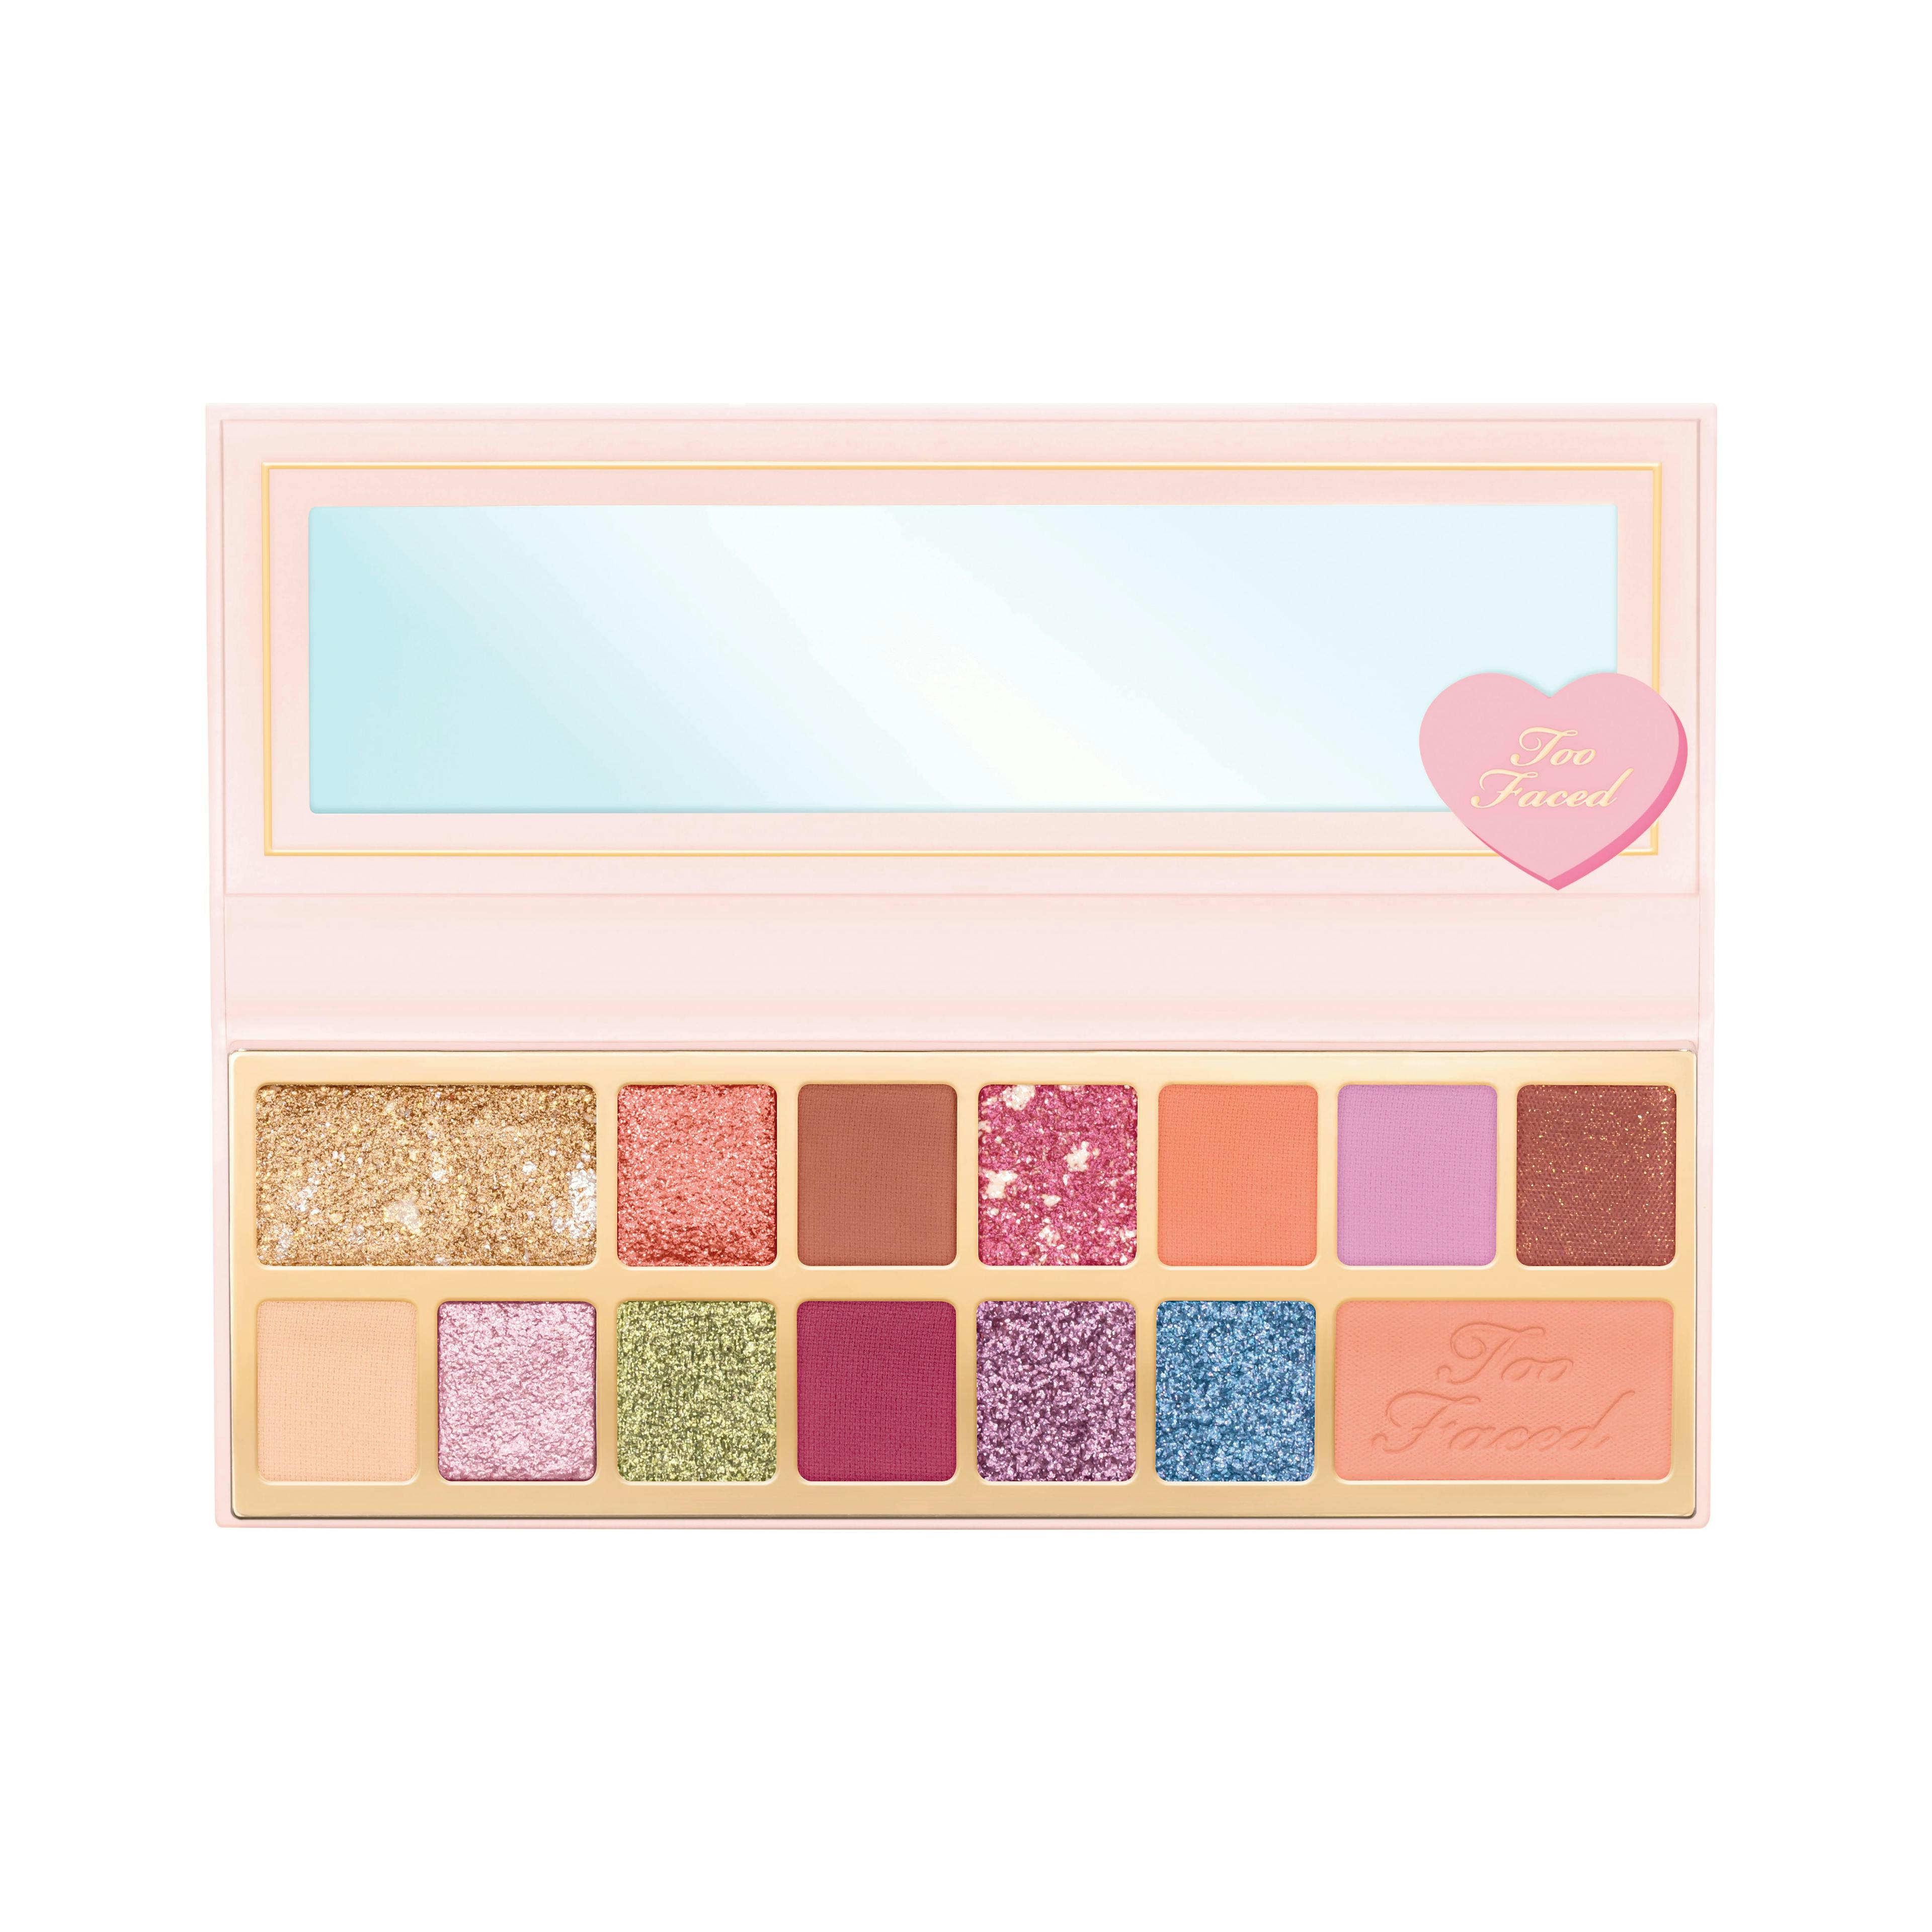 Pink Times Ahead Eyeshadow Palette, Too Faced